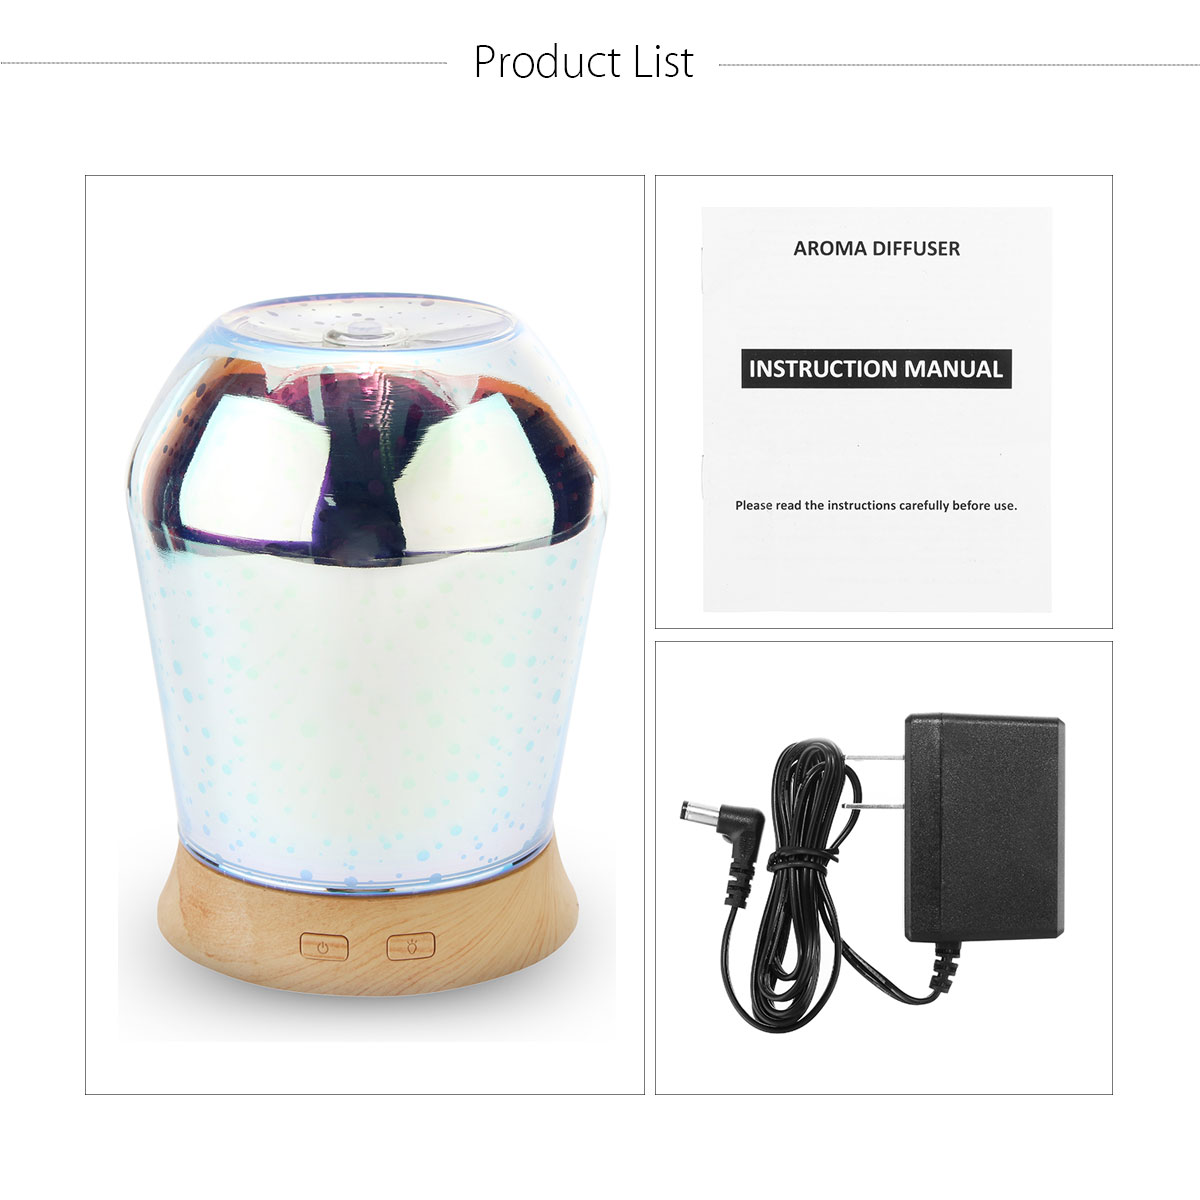 3D-LED-Ultrasonic-Diffuser-Humidifier-Aromatherapy-Essential-Oil-Diffuser-Mist-Humidifier-1421490-8